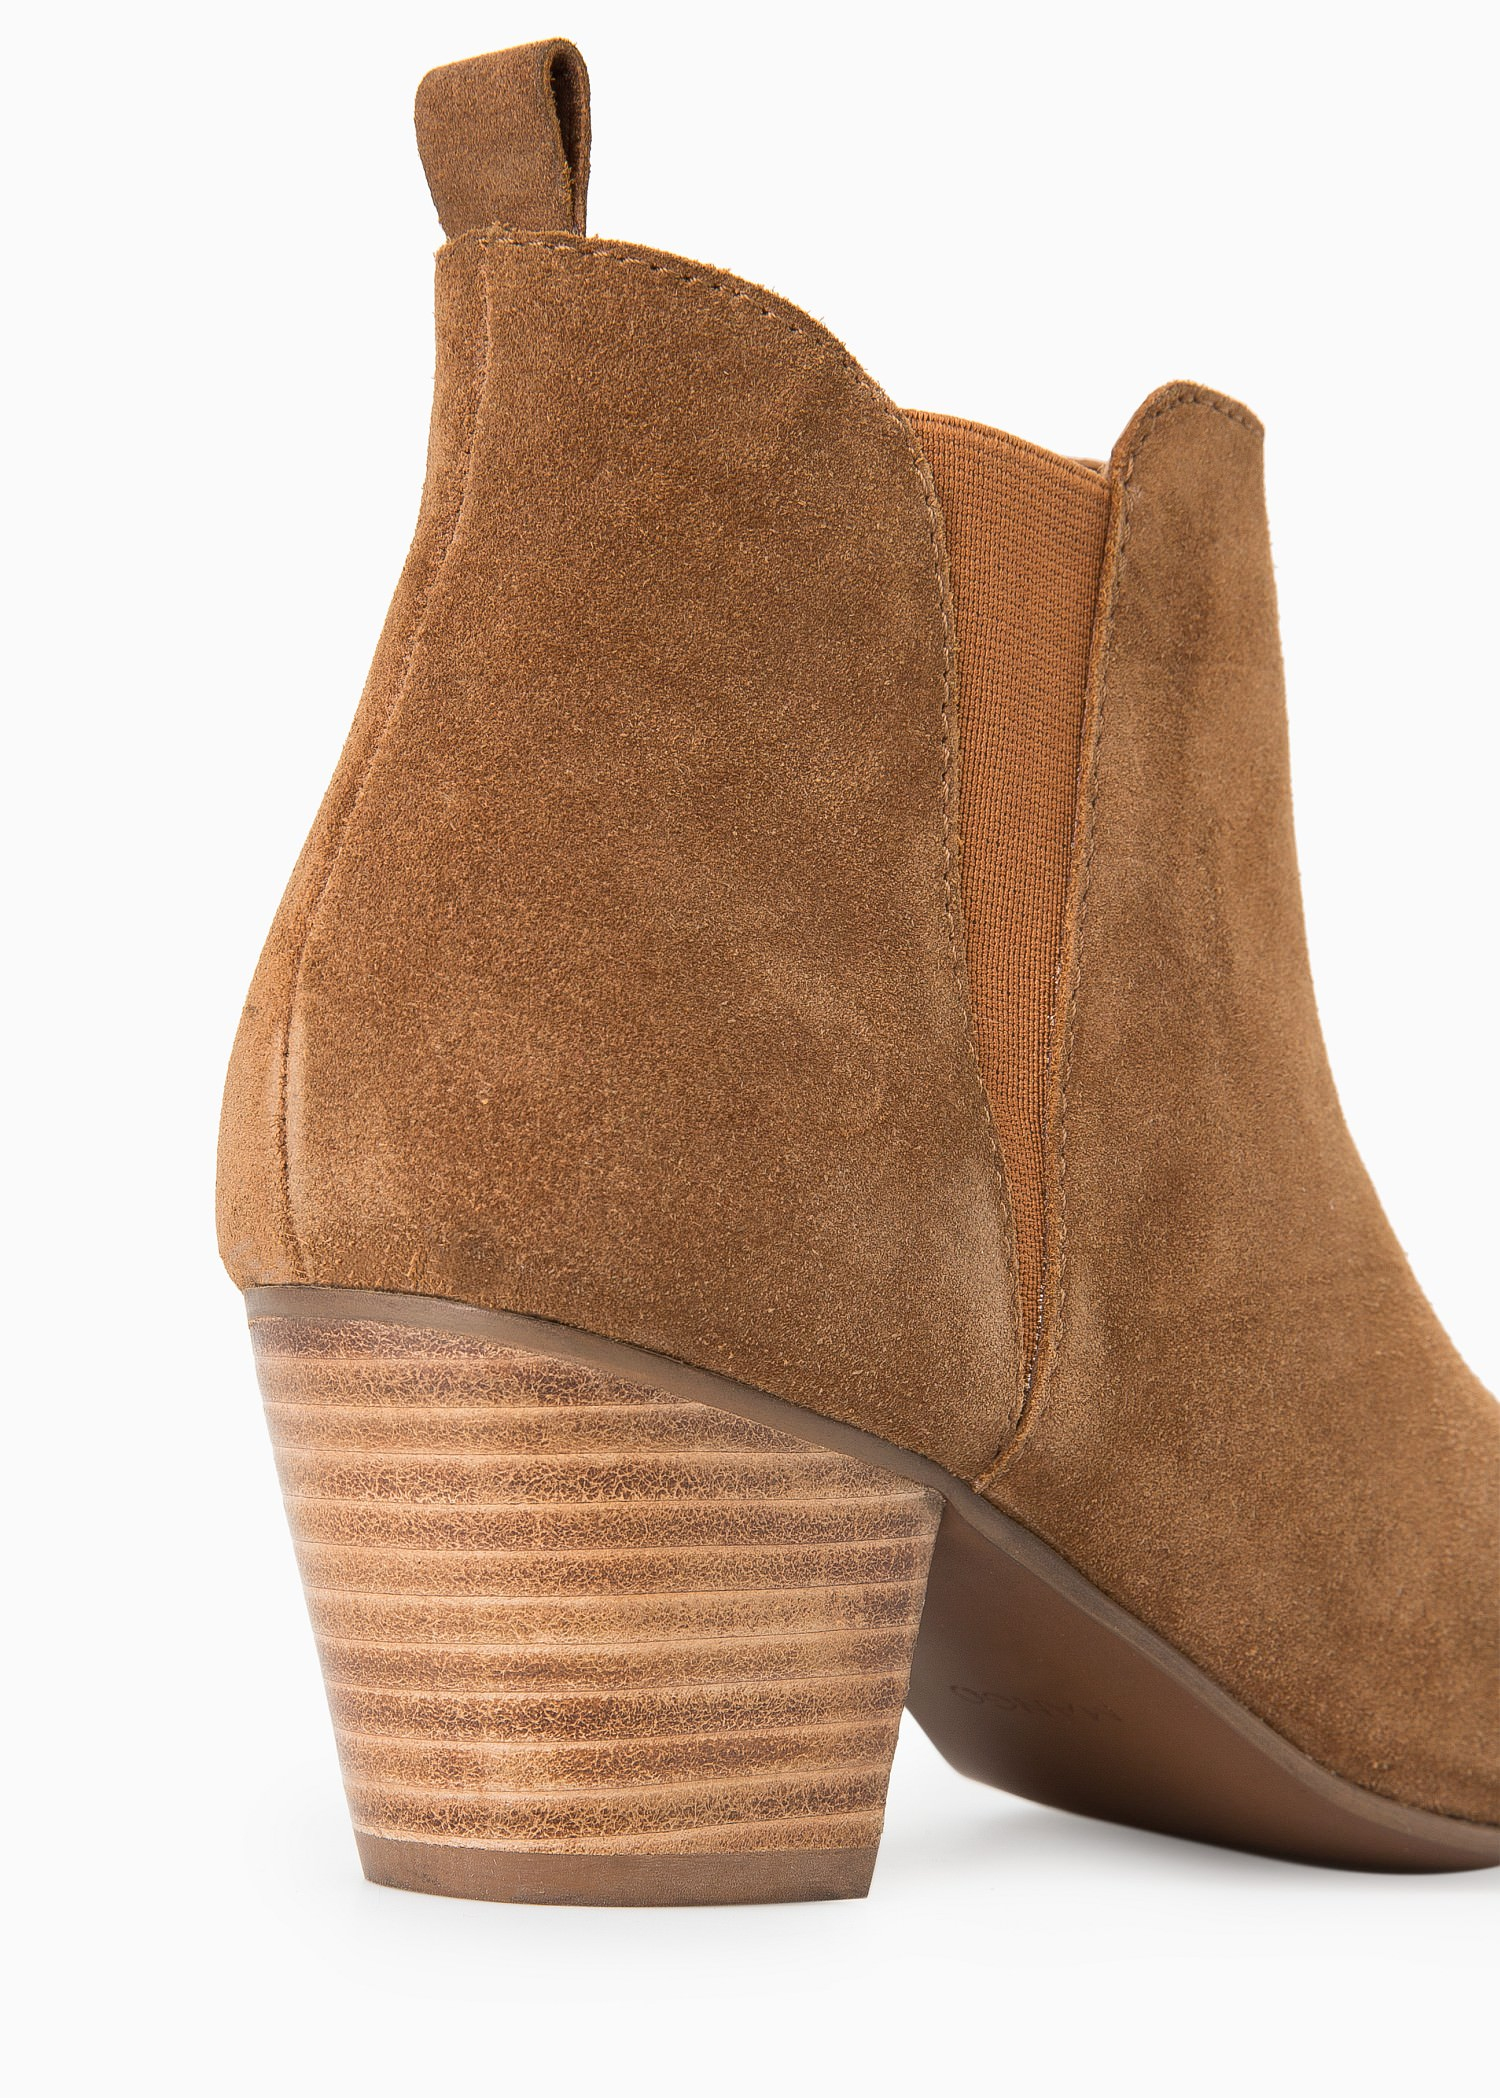 mango suede ankle boots